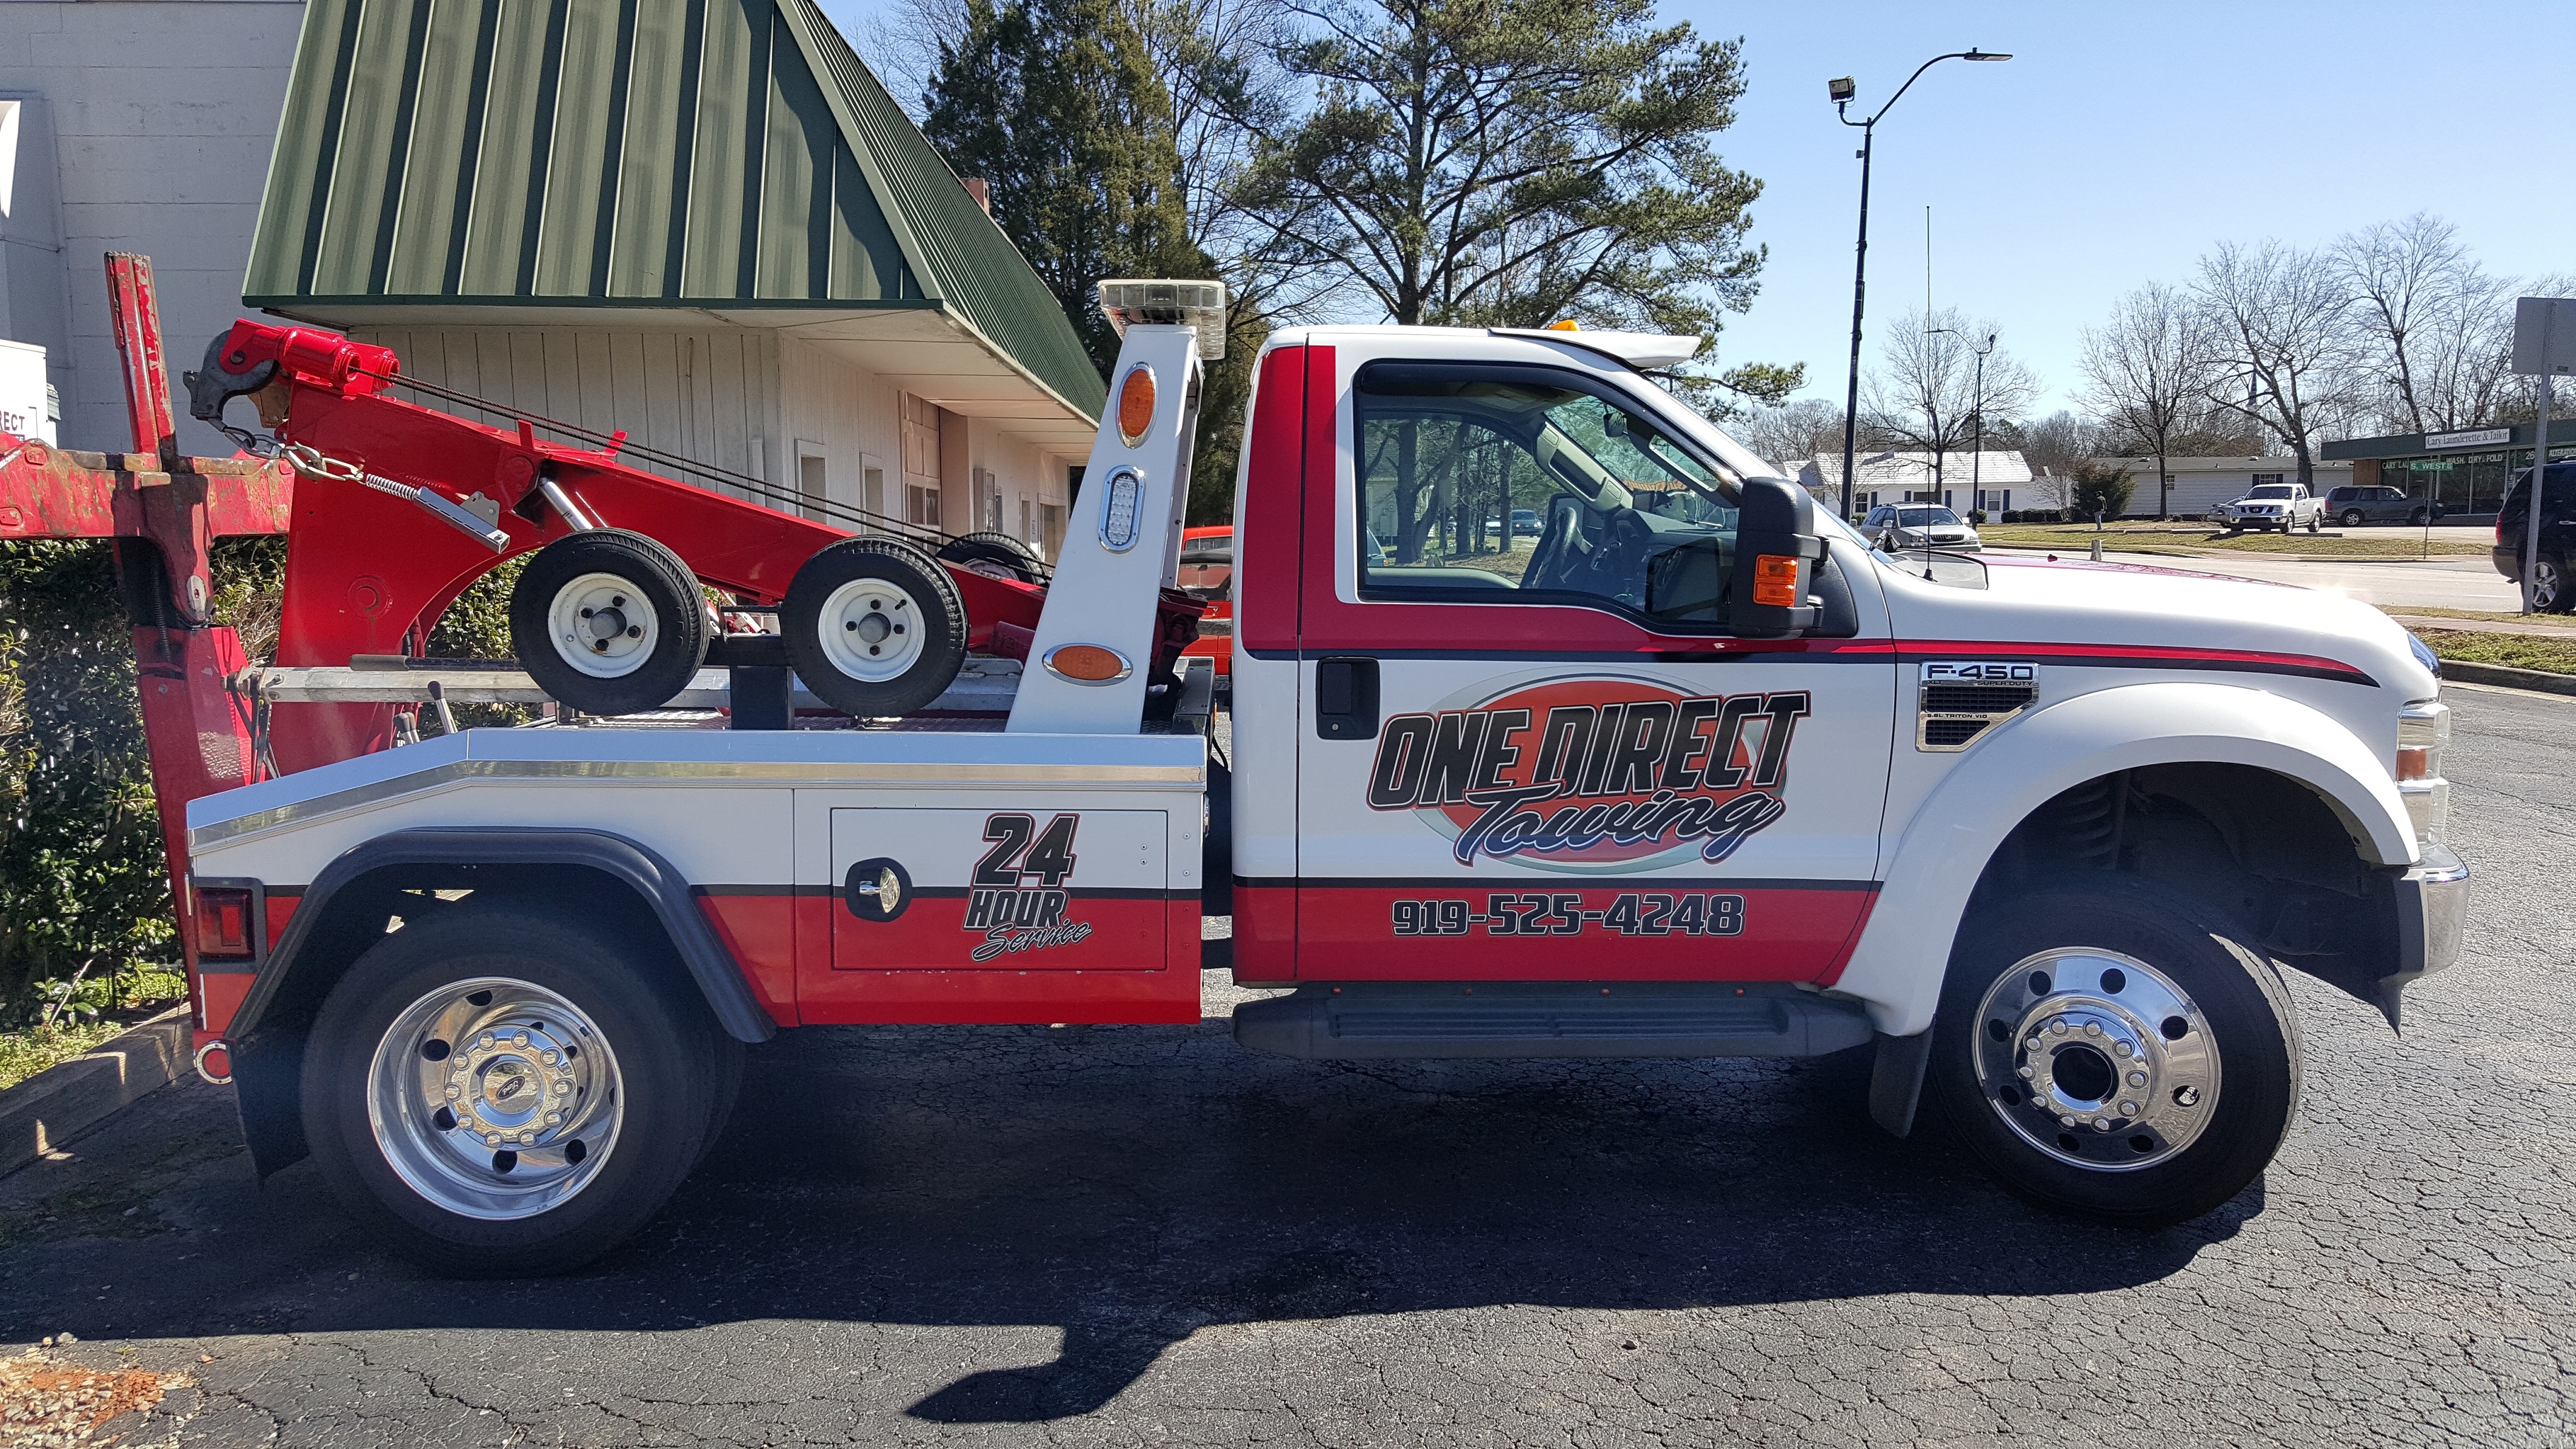 Experience the best in towing services.